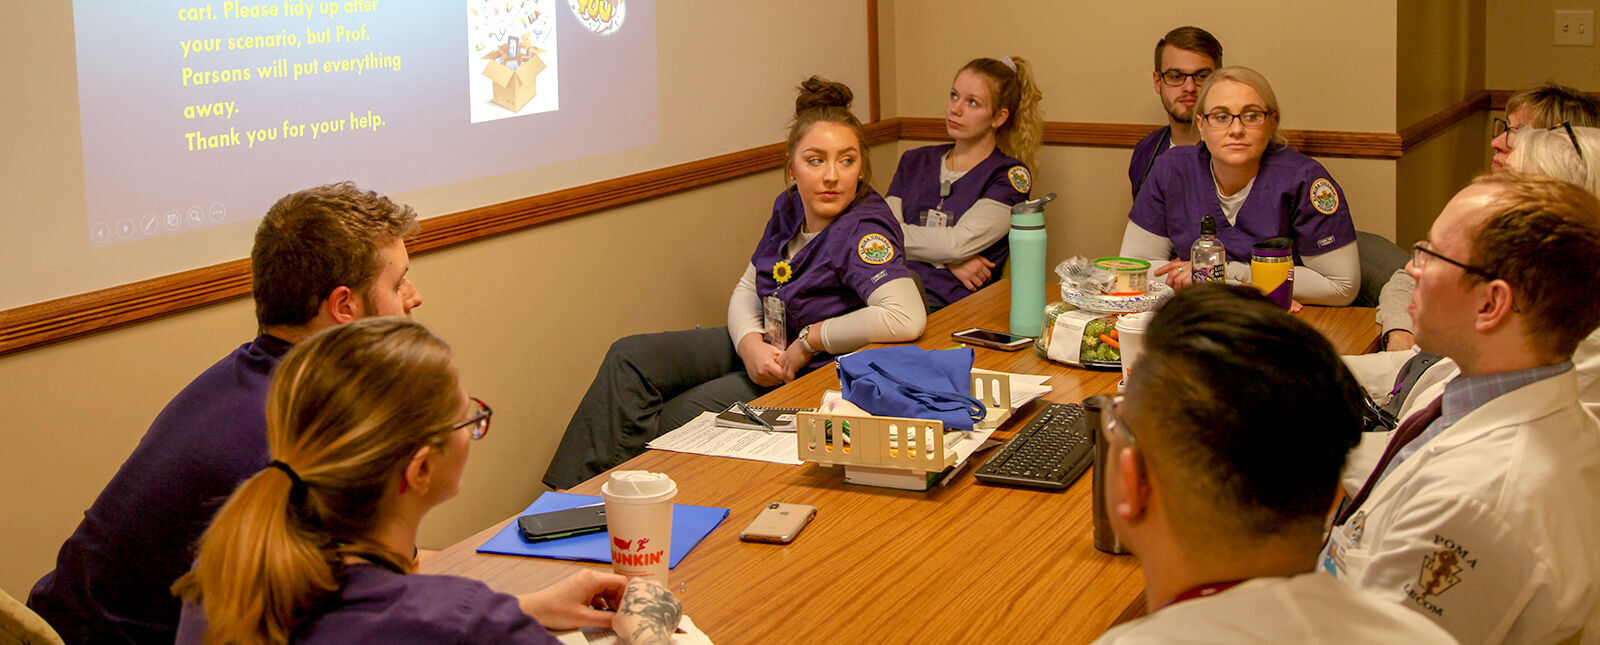 Nursing students listen to LECOM faculty present information in a meeting room